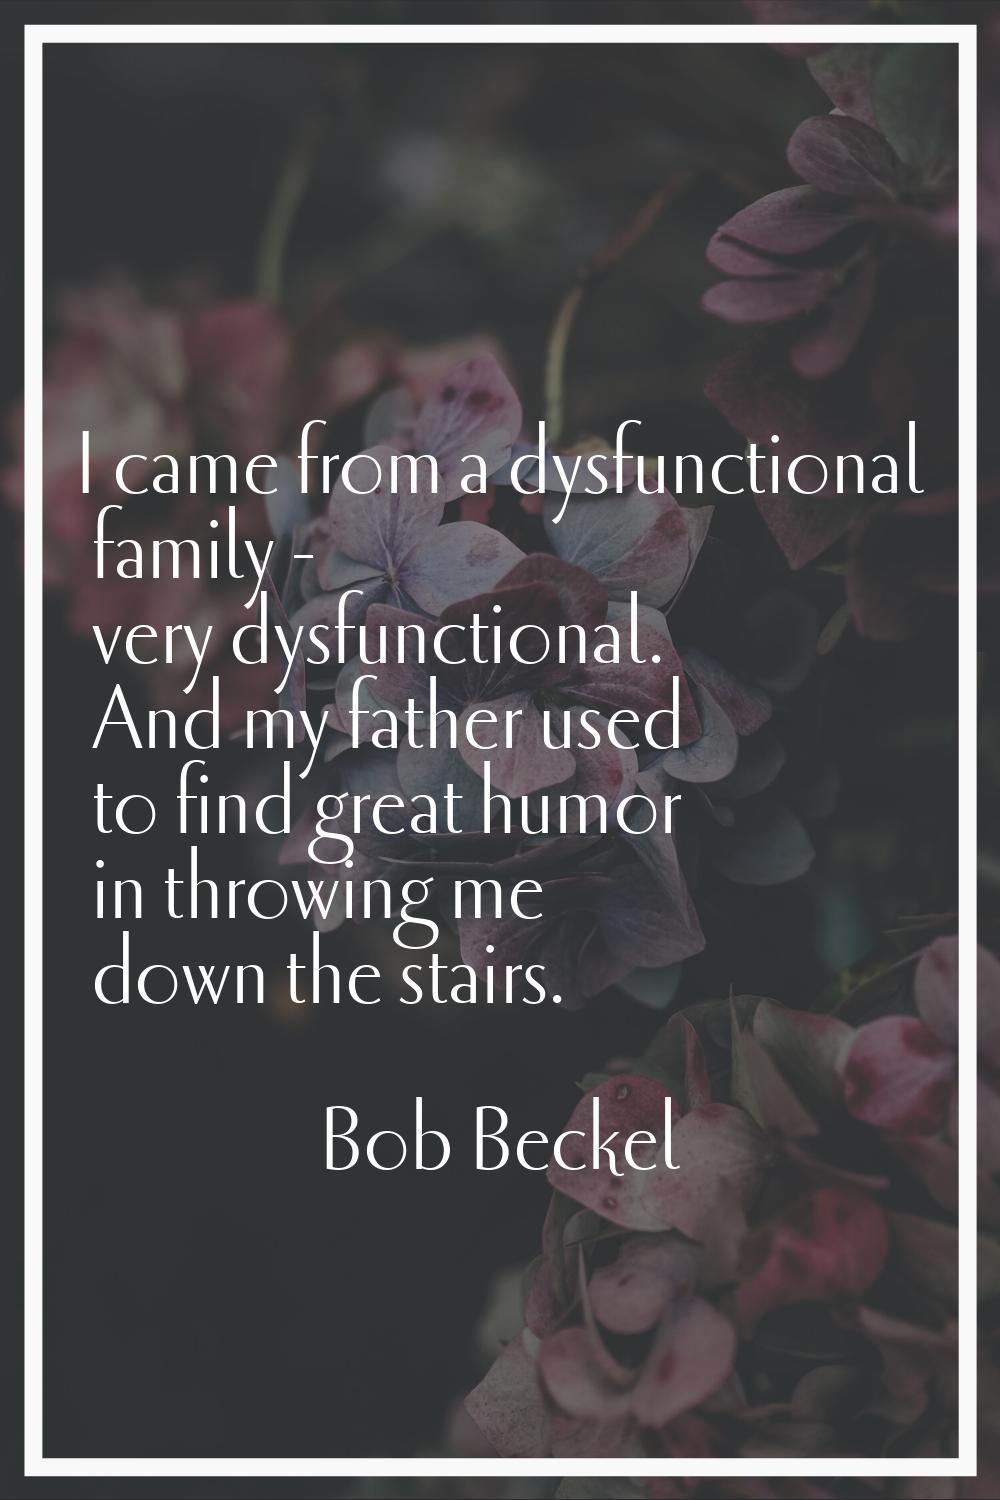 I came from a dysfunctional family - very dysfunctional. And my father used to find great humor in 